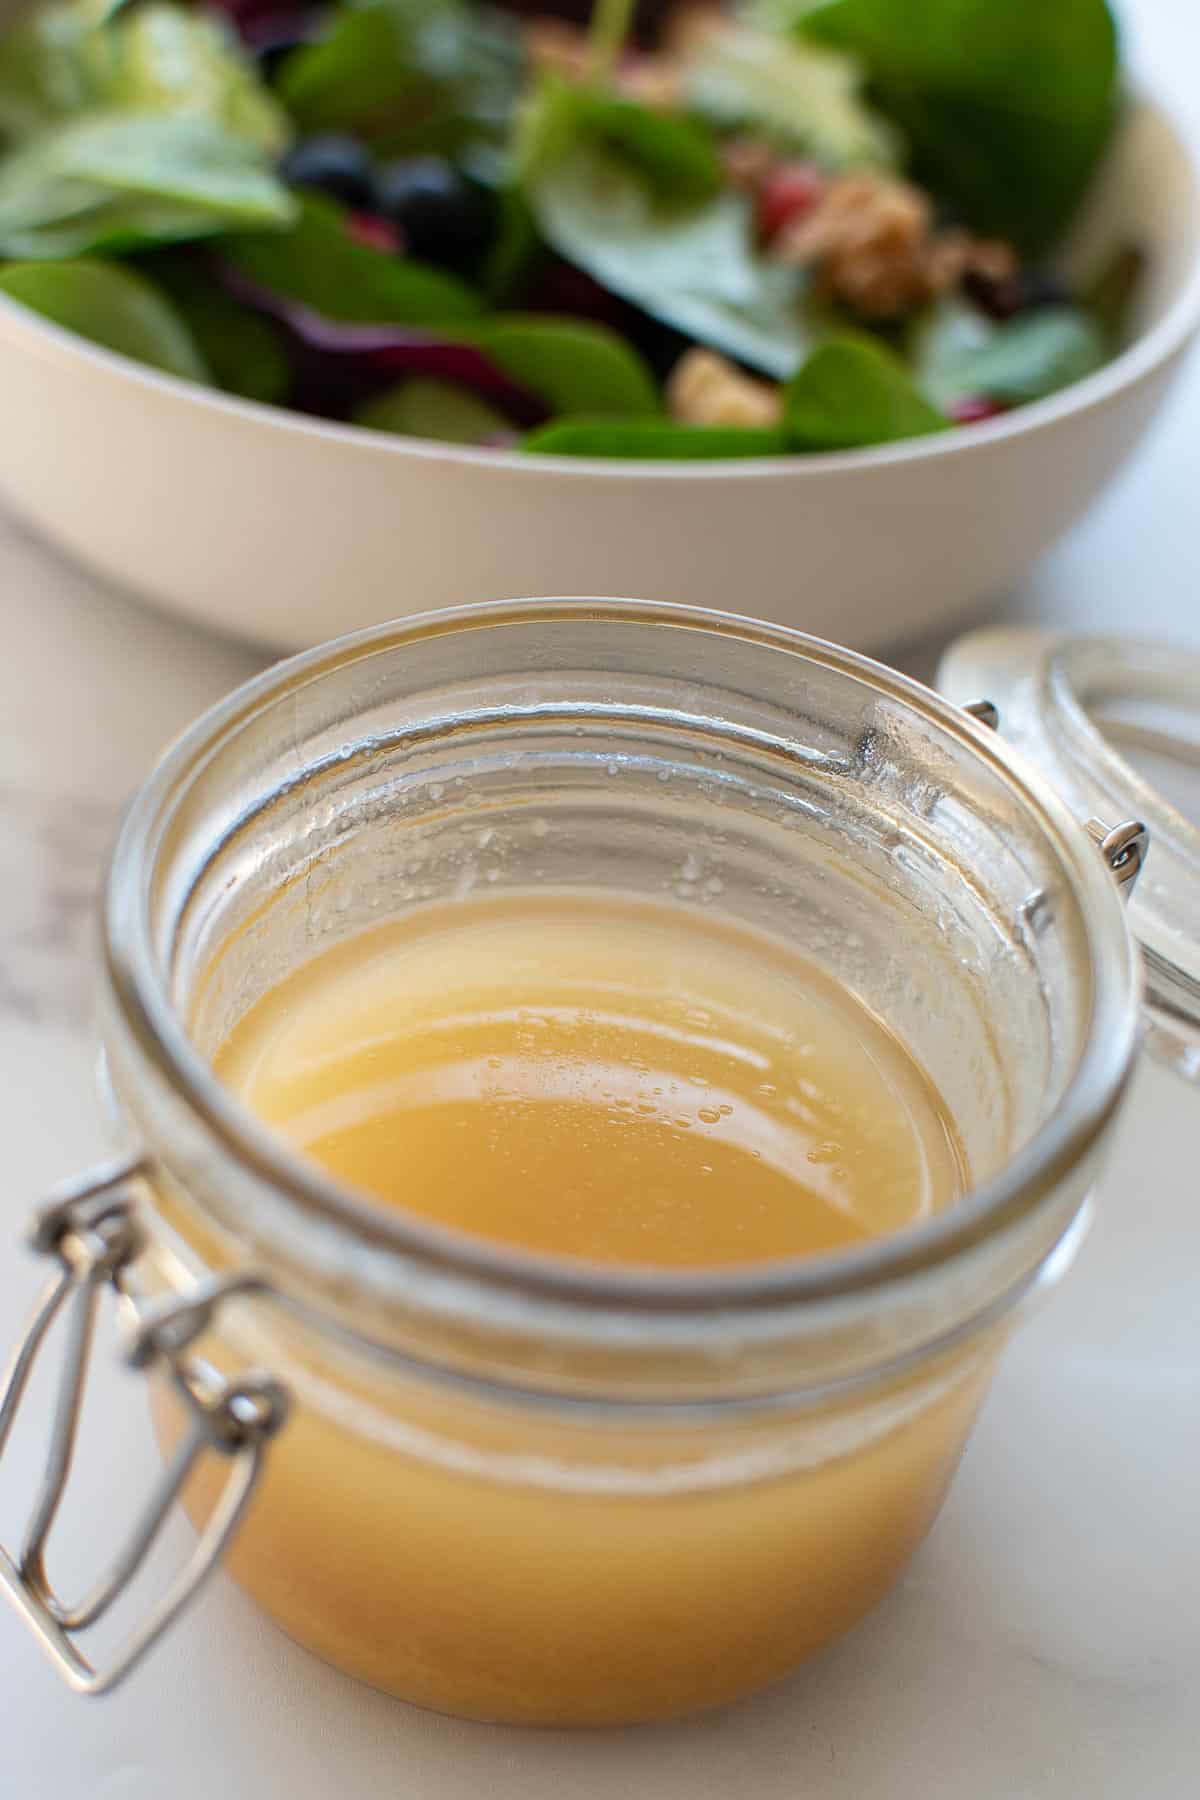 Maple vinaigrette in a jar, with salad in the background.